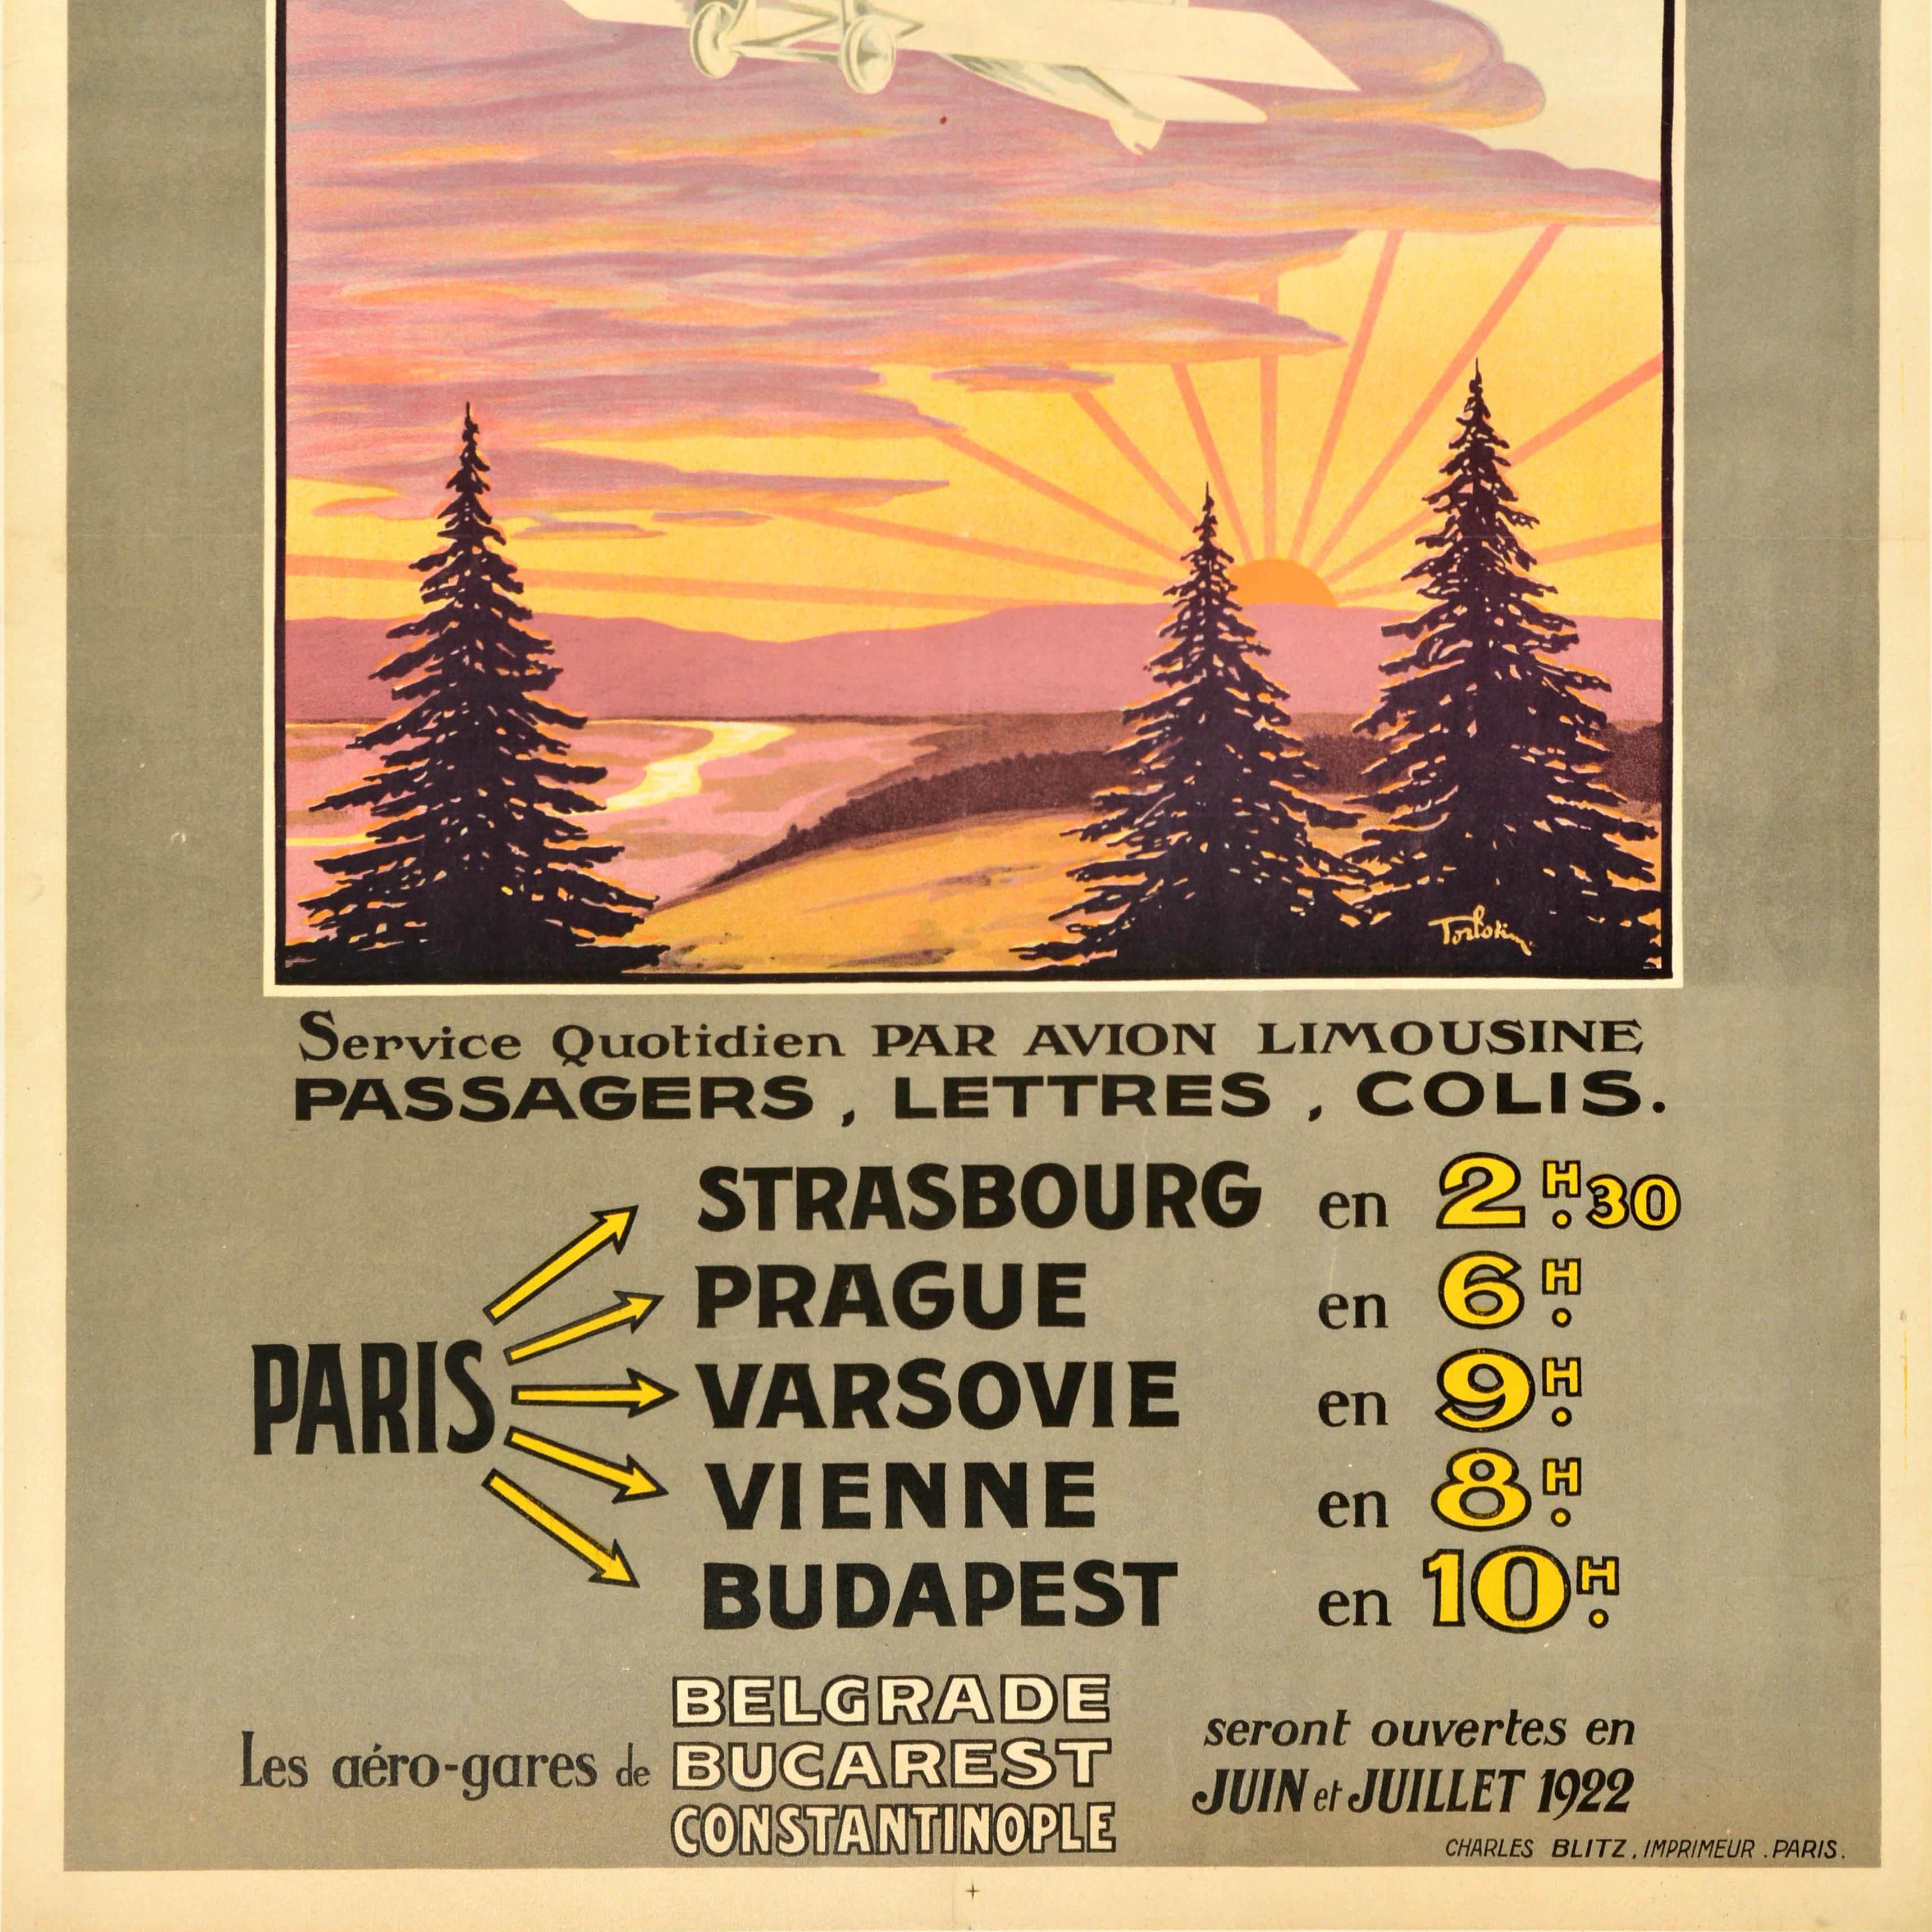 Original Antique Travel Poster Compagnie Franco Roumaine De Navigation Aerienne In Good Condition For Sale In London, GB